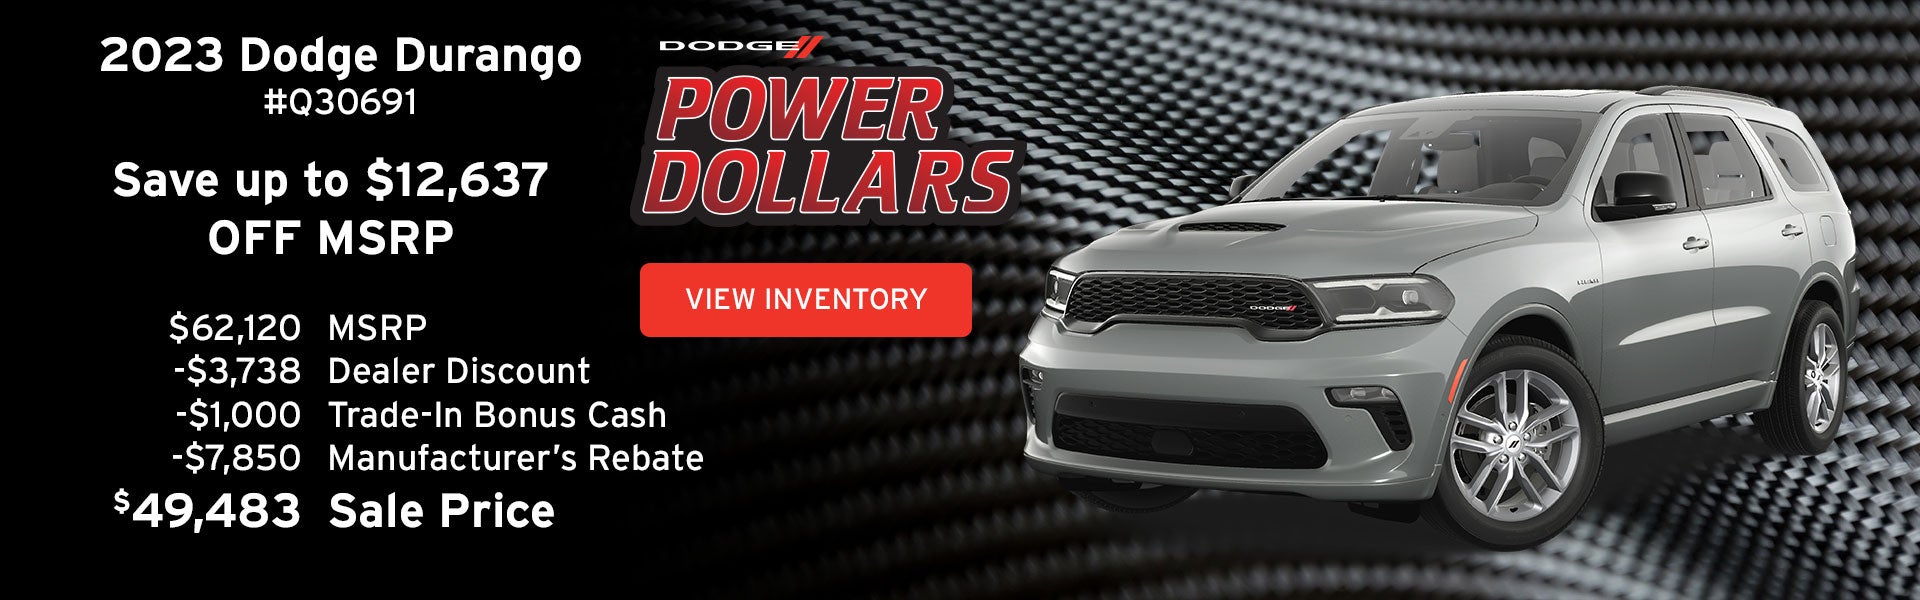 Save up to $12,637 on a New Dodge Durango